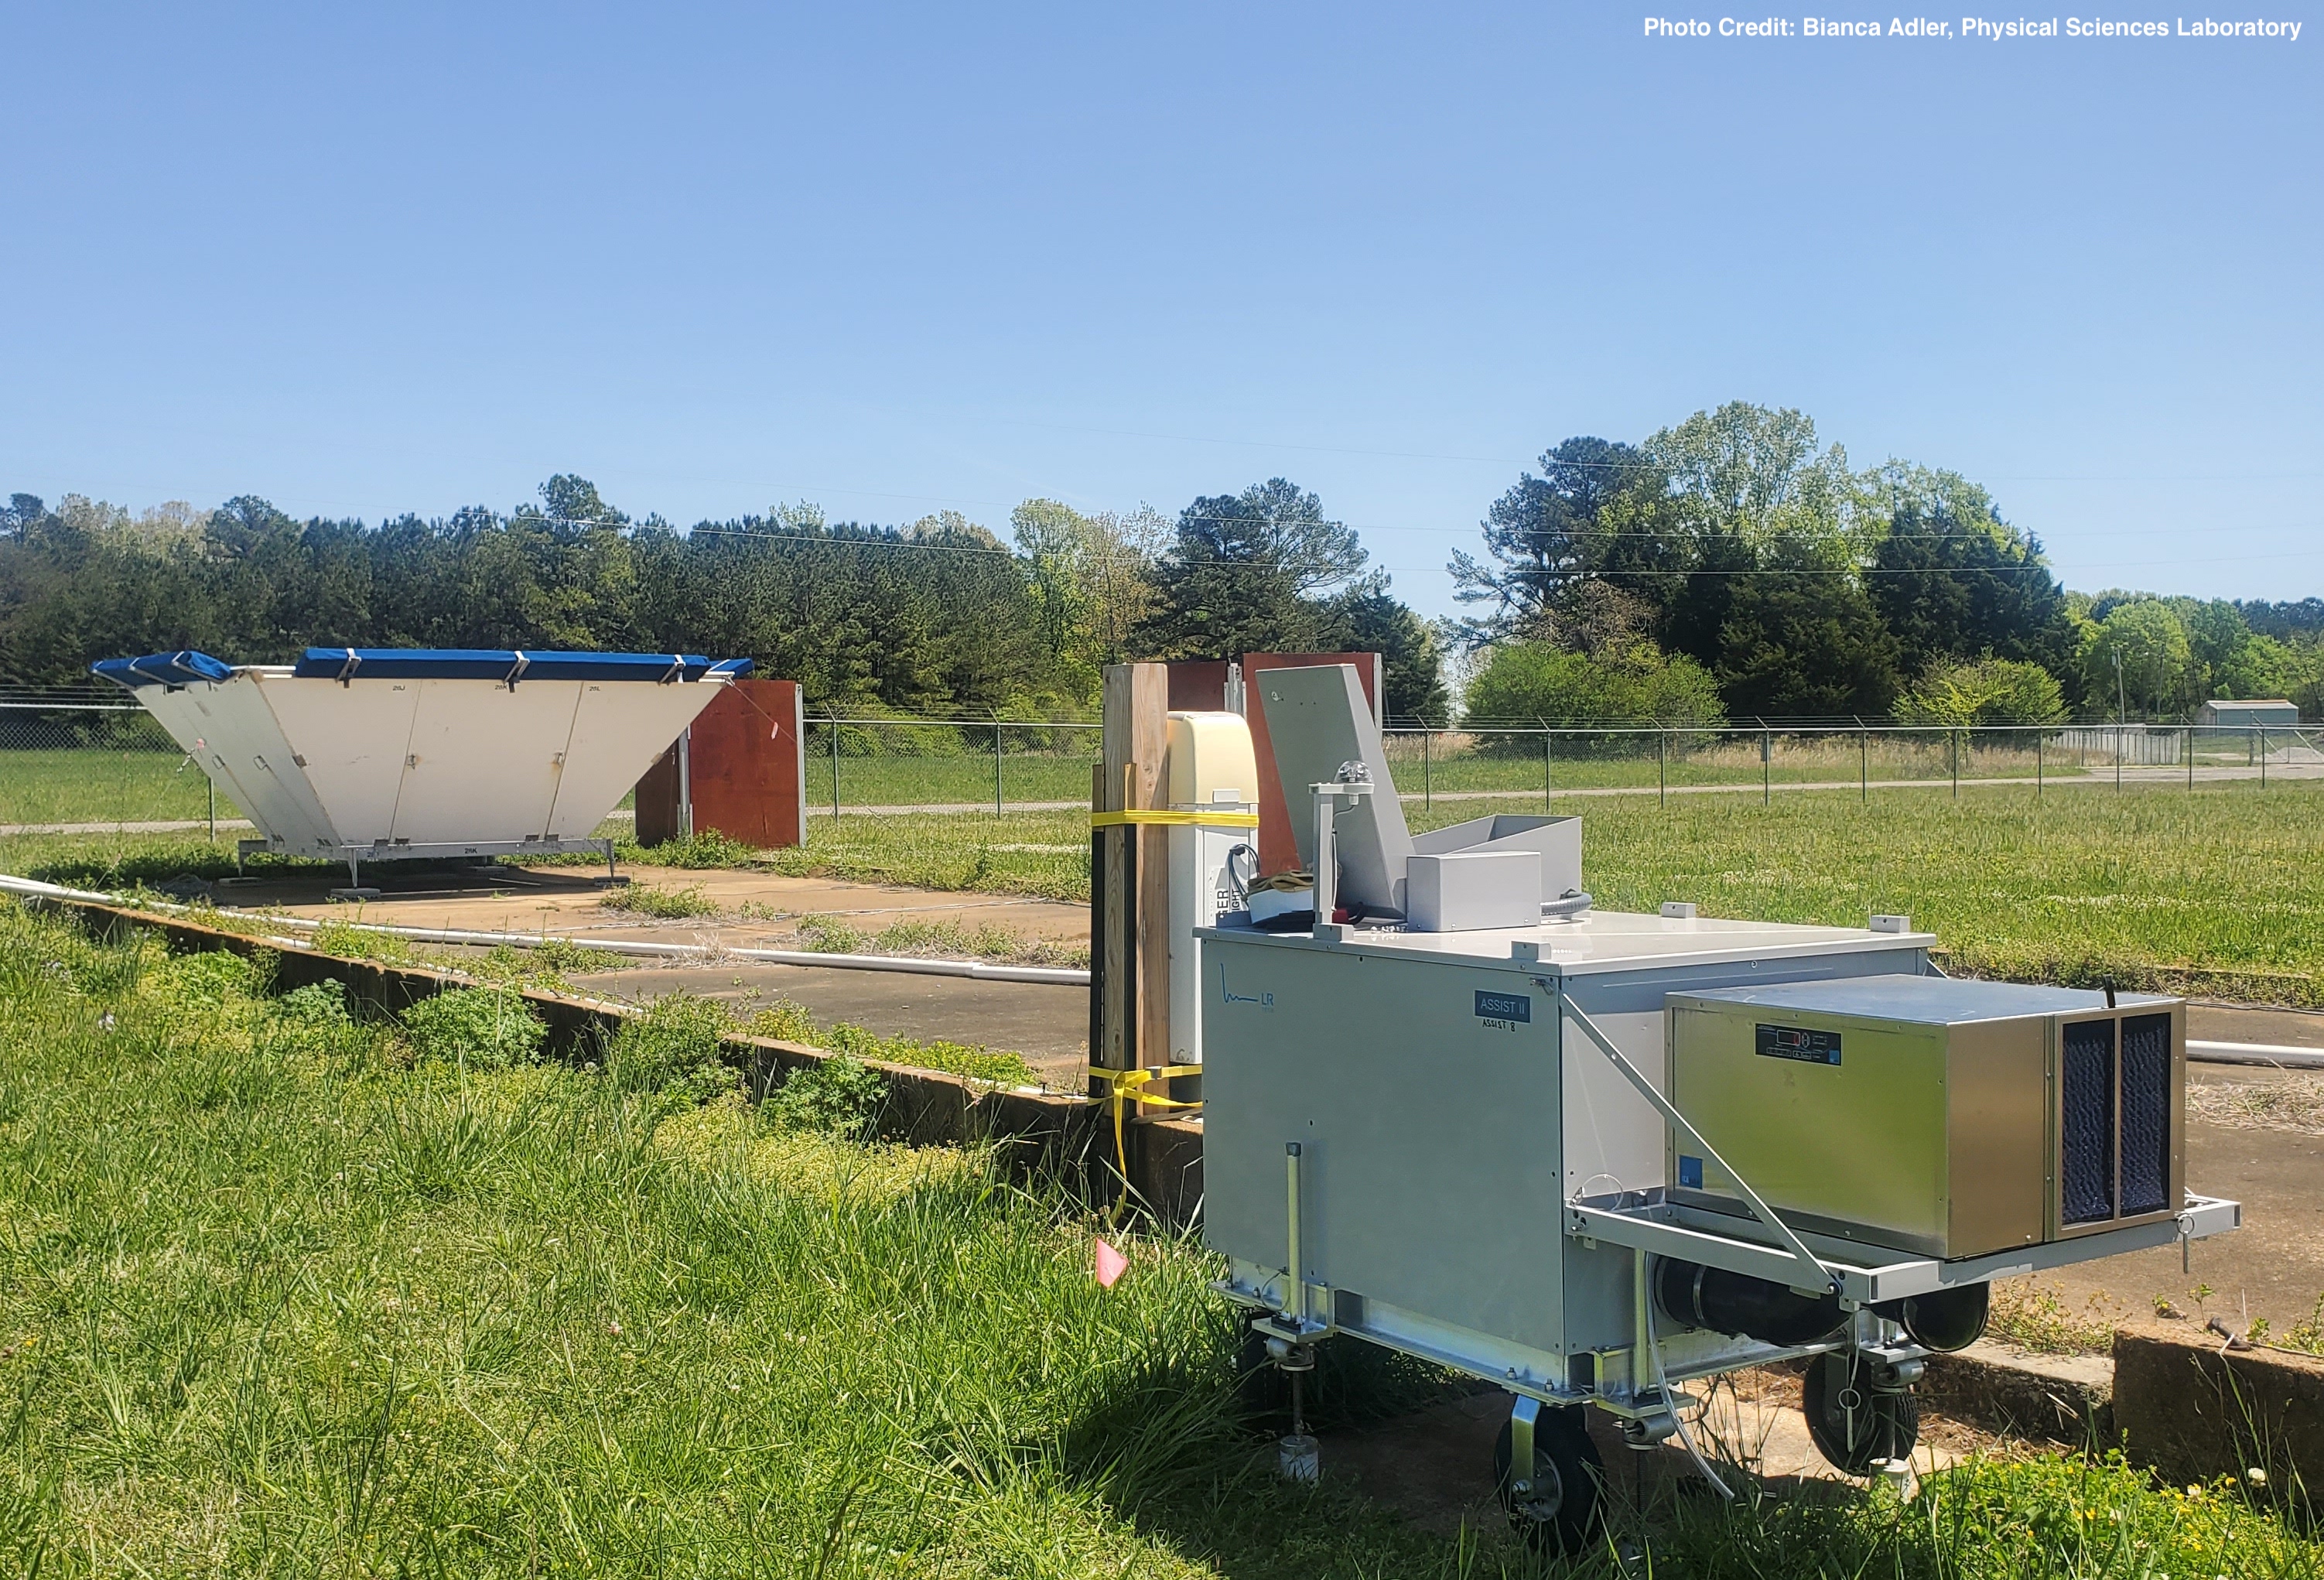 An infrared spectrometer and ceilometer sit in the foreground with a trapezoidal radar wind profiler in the background, in a grassy field in Courtland, Alabama.